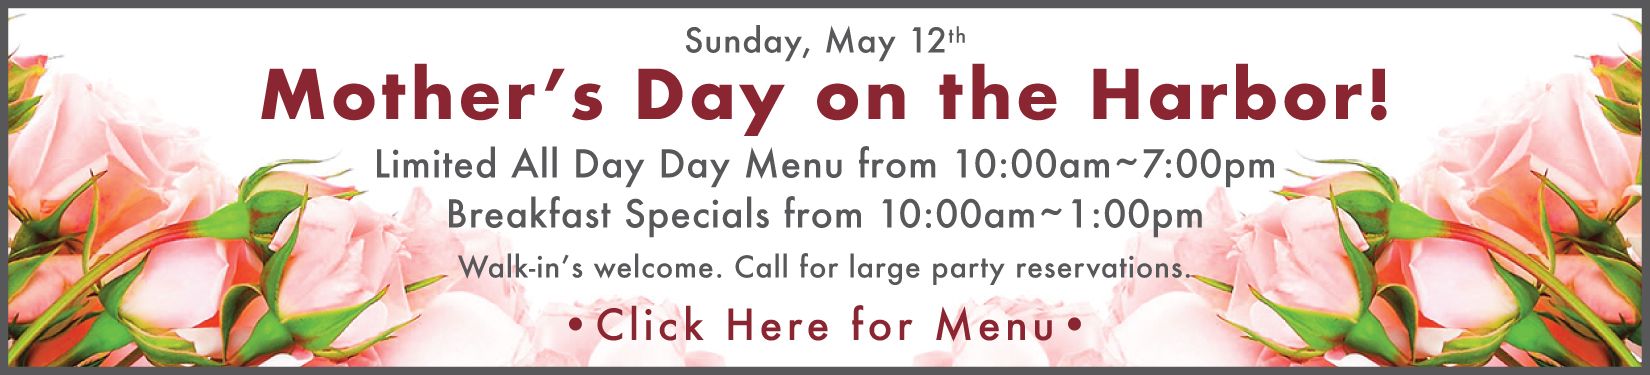 Mother's Day on the Harbor! Sunday, May 12th. Limited all day menu from 10 - 7pm. Breakfast special from 10 - 1pm. Call for large party reservations. Click here for menu.